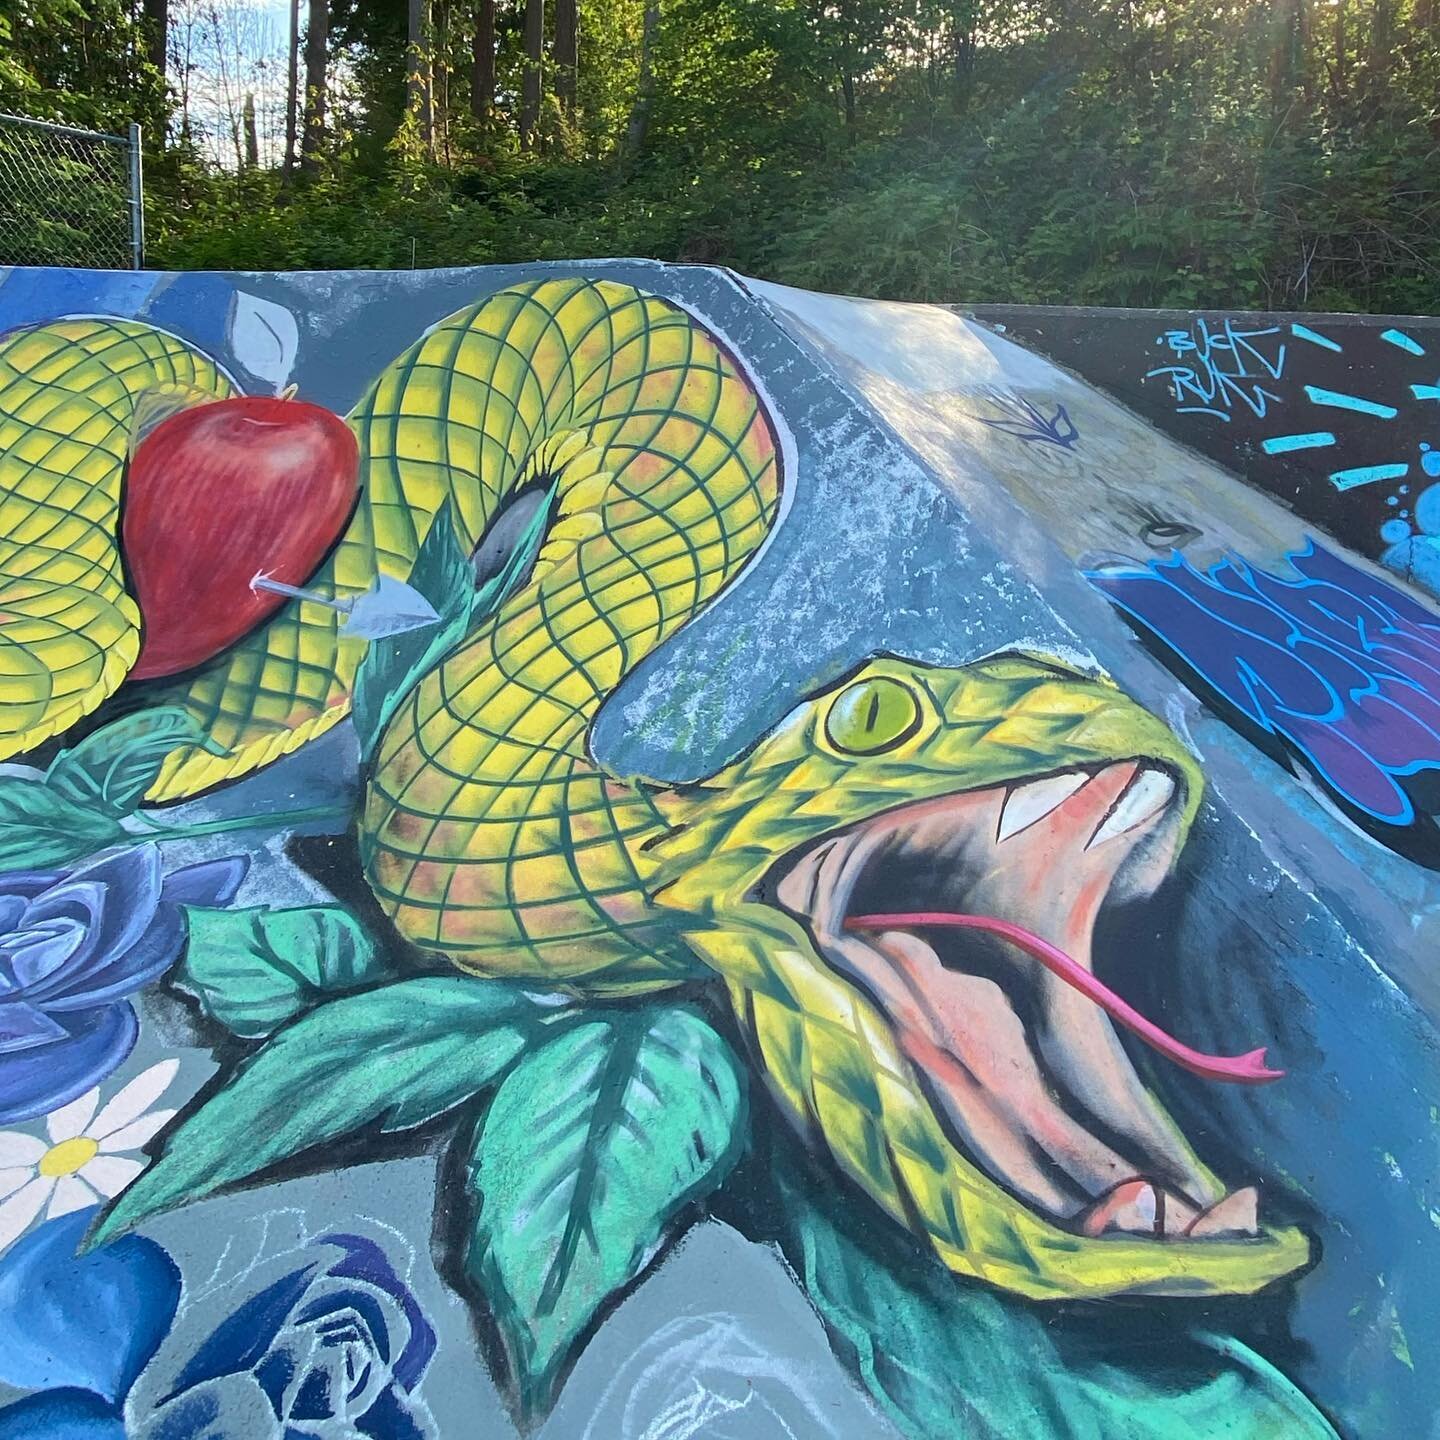 Ms. Gray&rsquo;s Graffiti Jam at the Sechelt Rotary Skatepark - to finish my teaching practicum I led a group of students to paint the skatepark by their school. It&rsquo;s been exceptional year and I am beyond grateful I could come home to the Sunsh